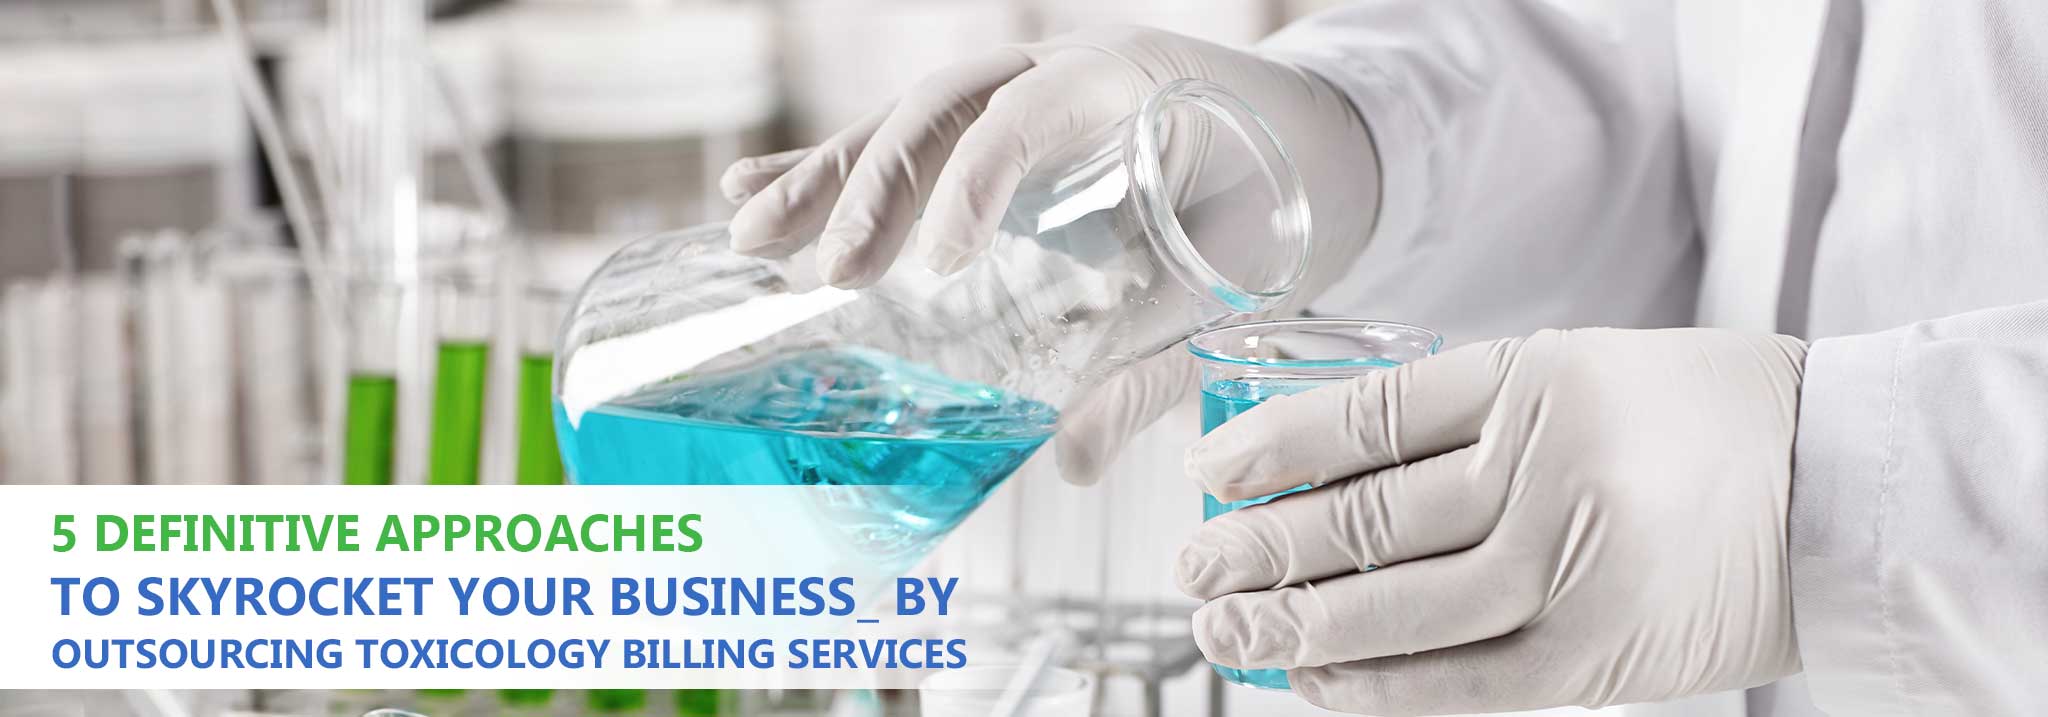 Outsourcing Toxicology Billing Services